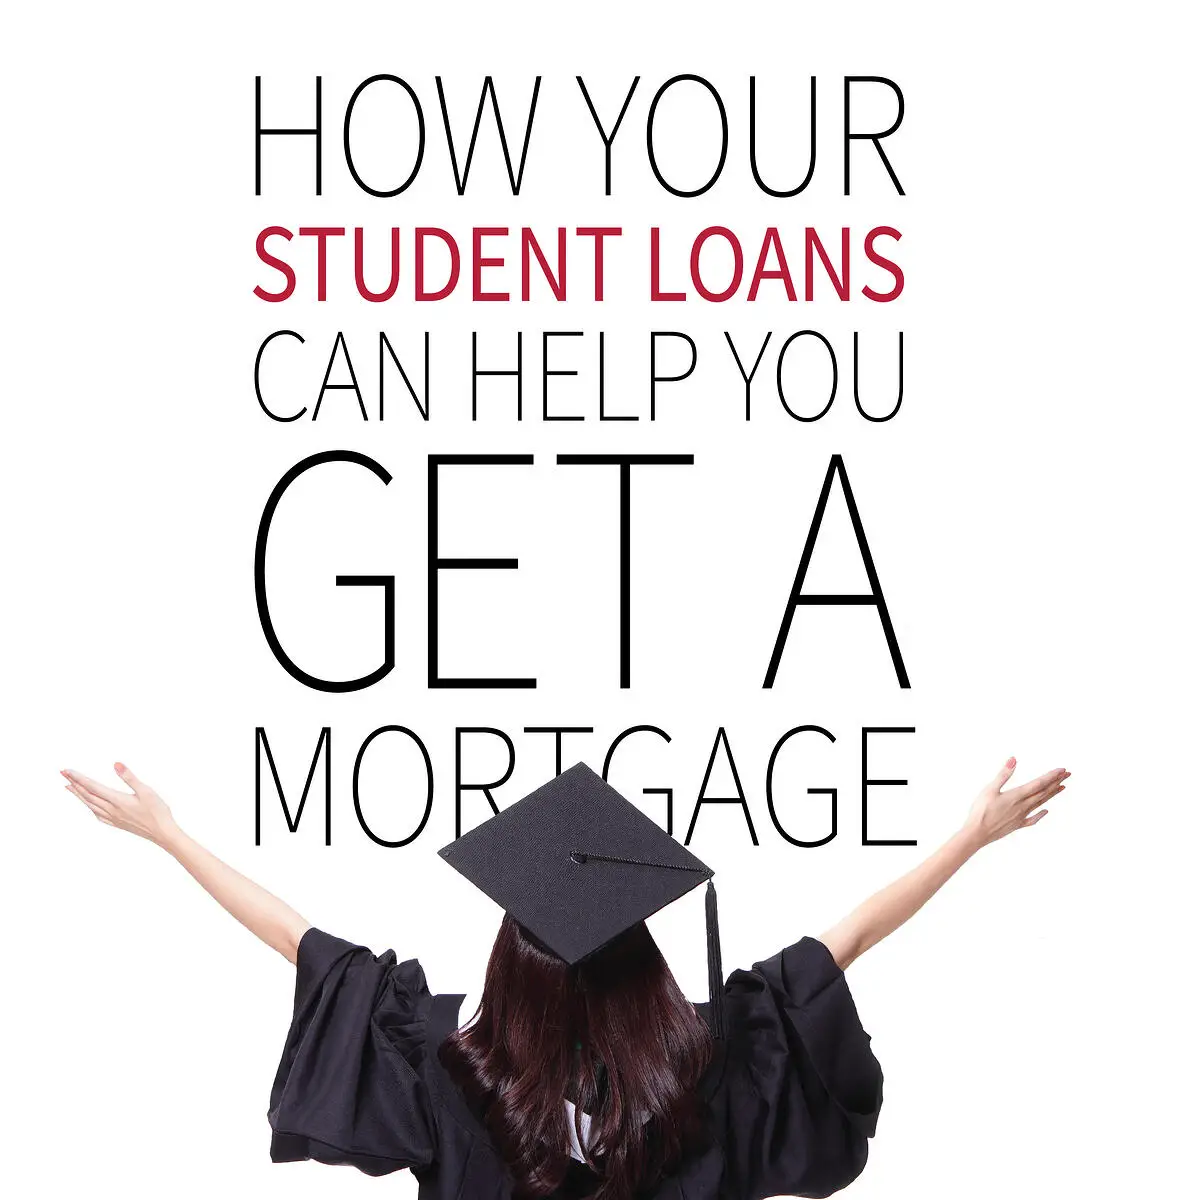 How your student loans can help you get a mortgage